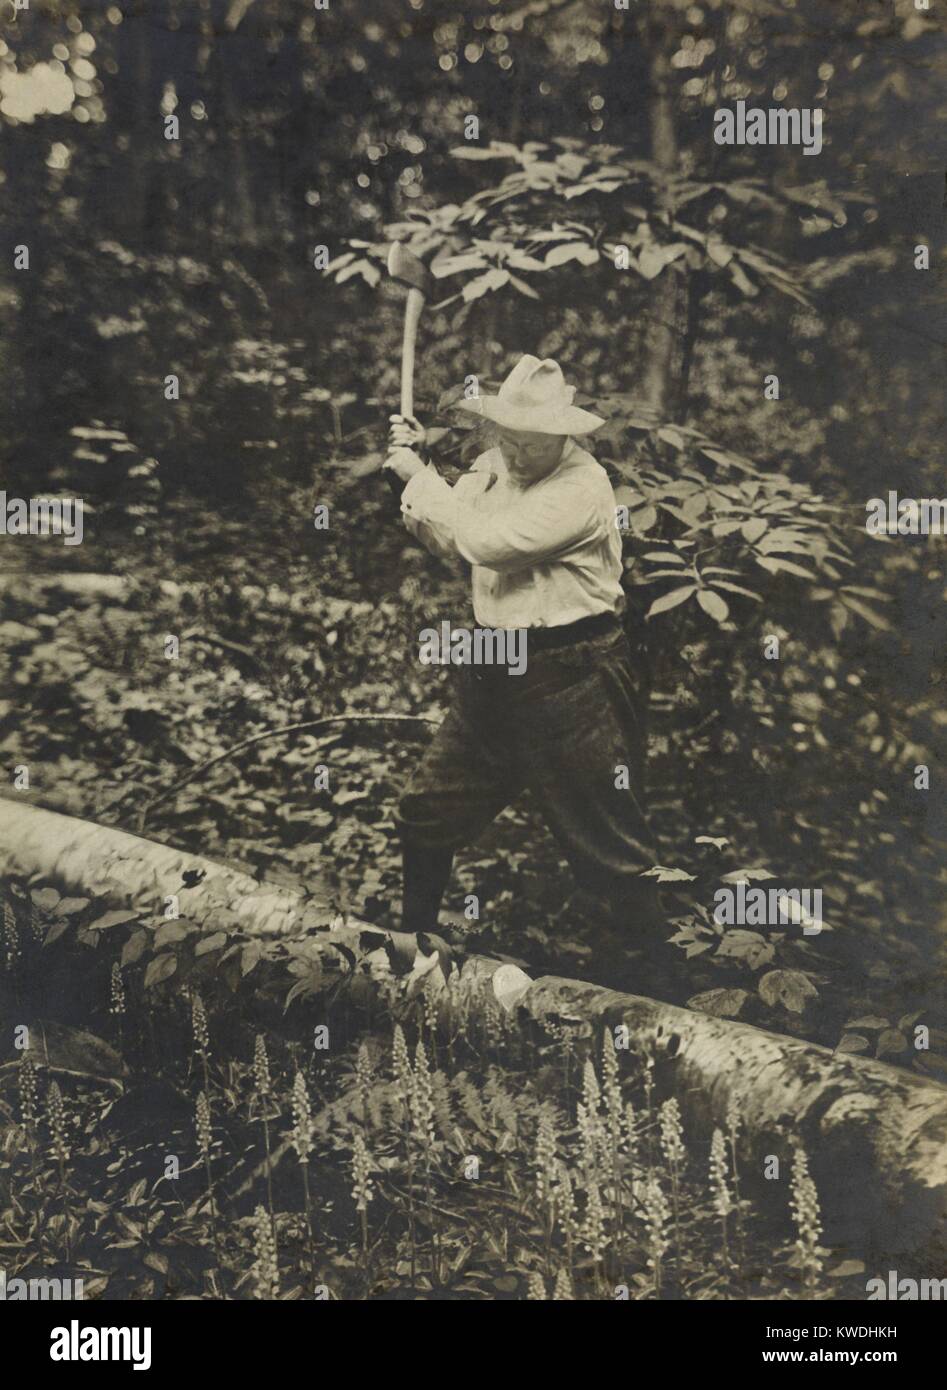 President Theodore Roosevelt chopping, a fallen tree with an axe, summer 1905. Woodcutting was one form of exercise he took while at Sagamore Hill, his home in Oyster Bay, Long Island, NY (BSLOC 2017 6 50) Stock Photo